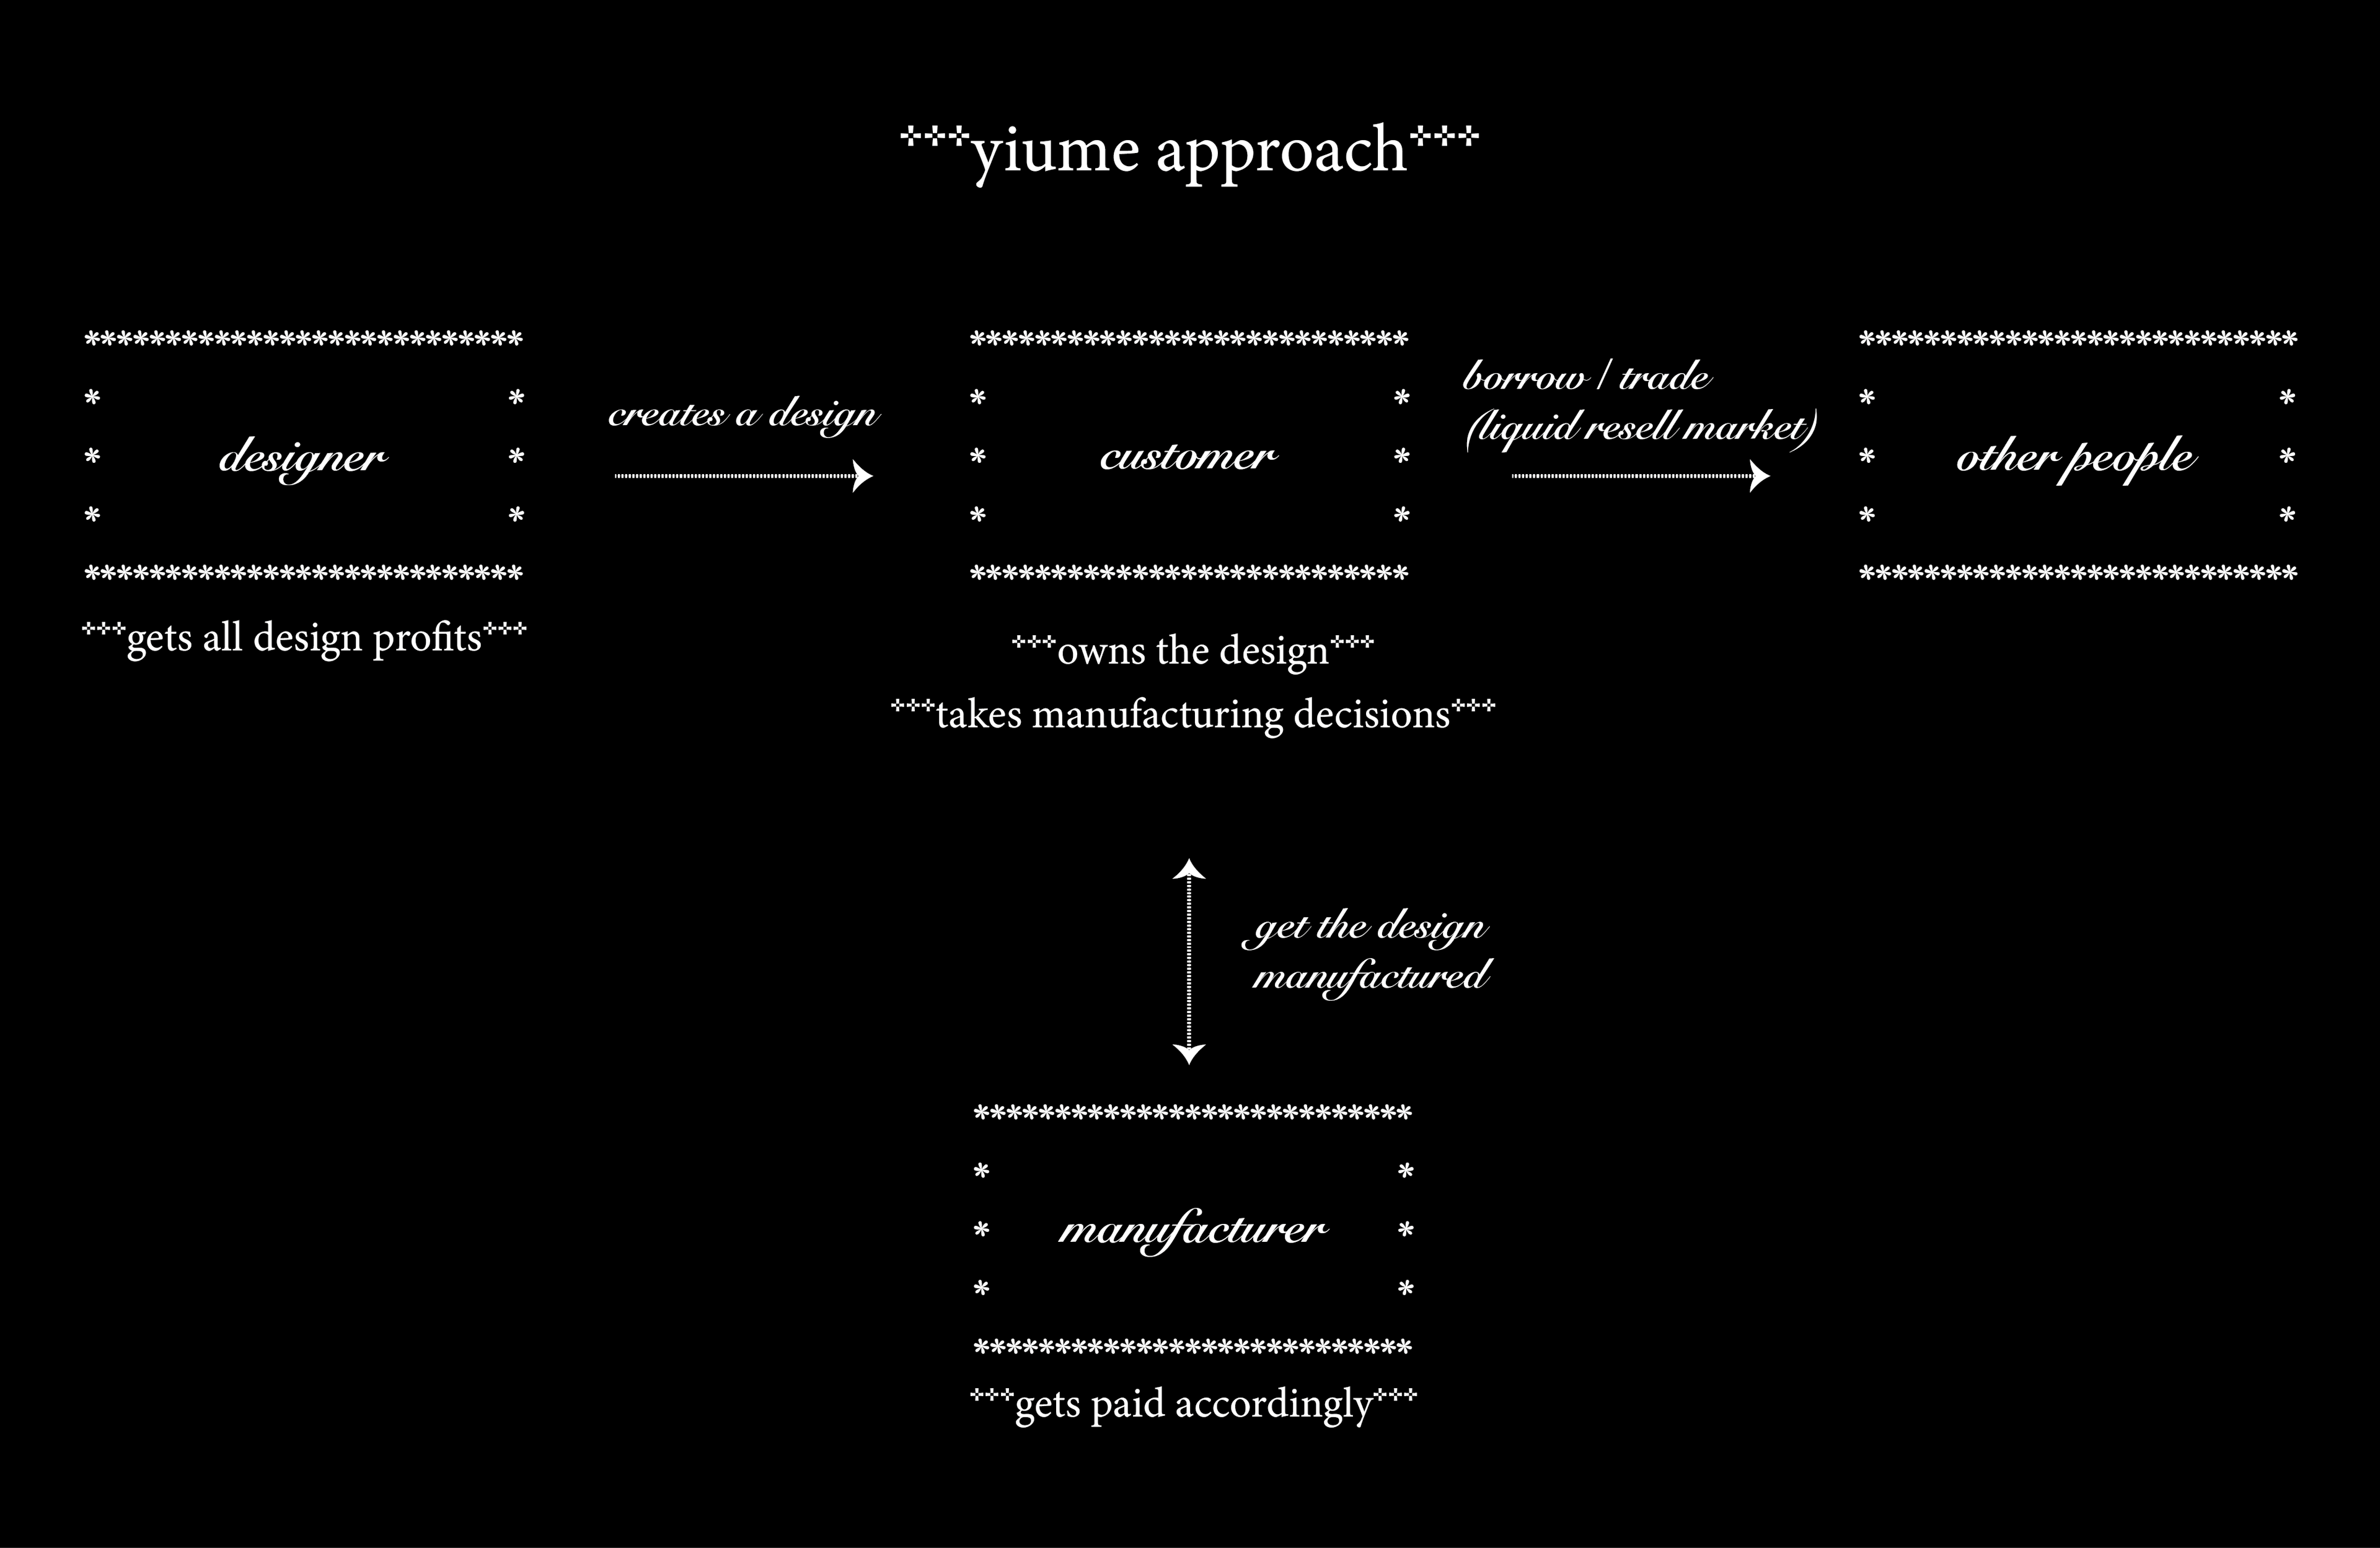 the yiume approach